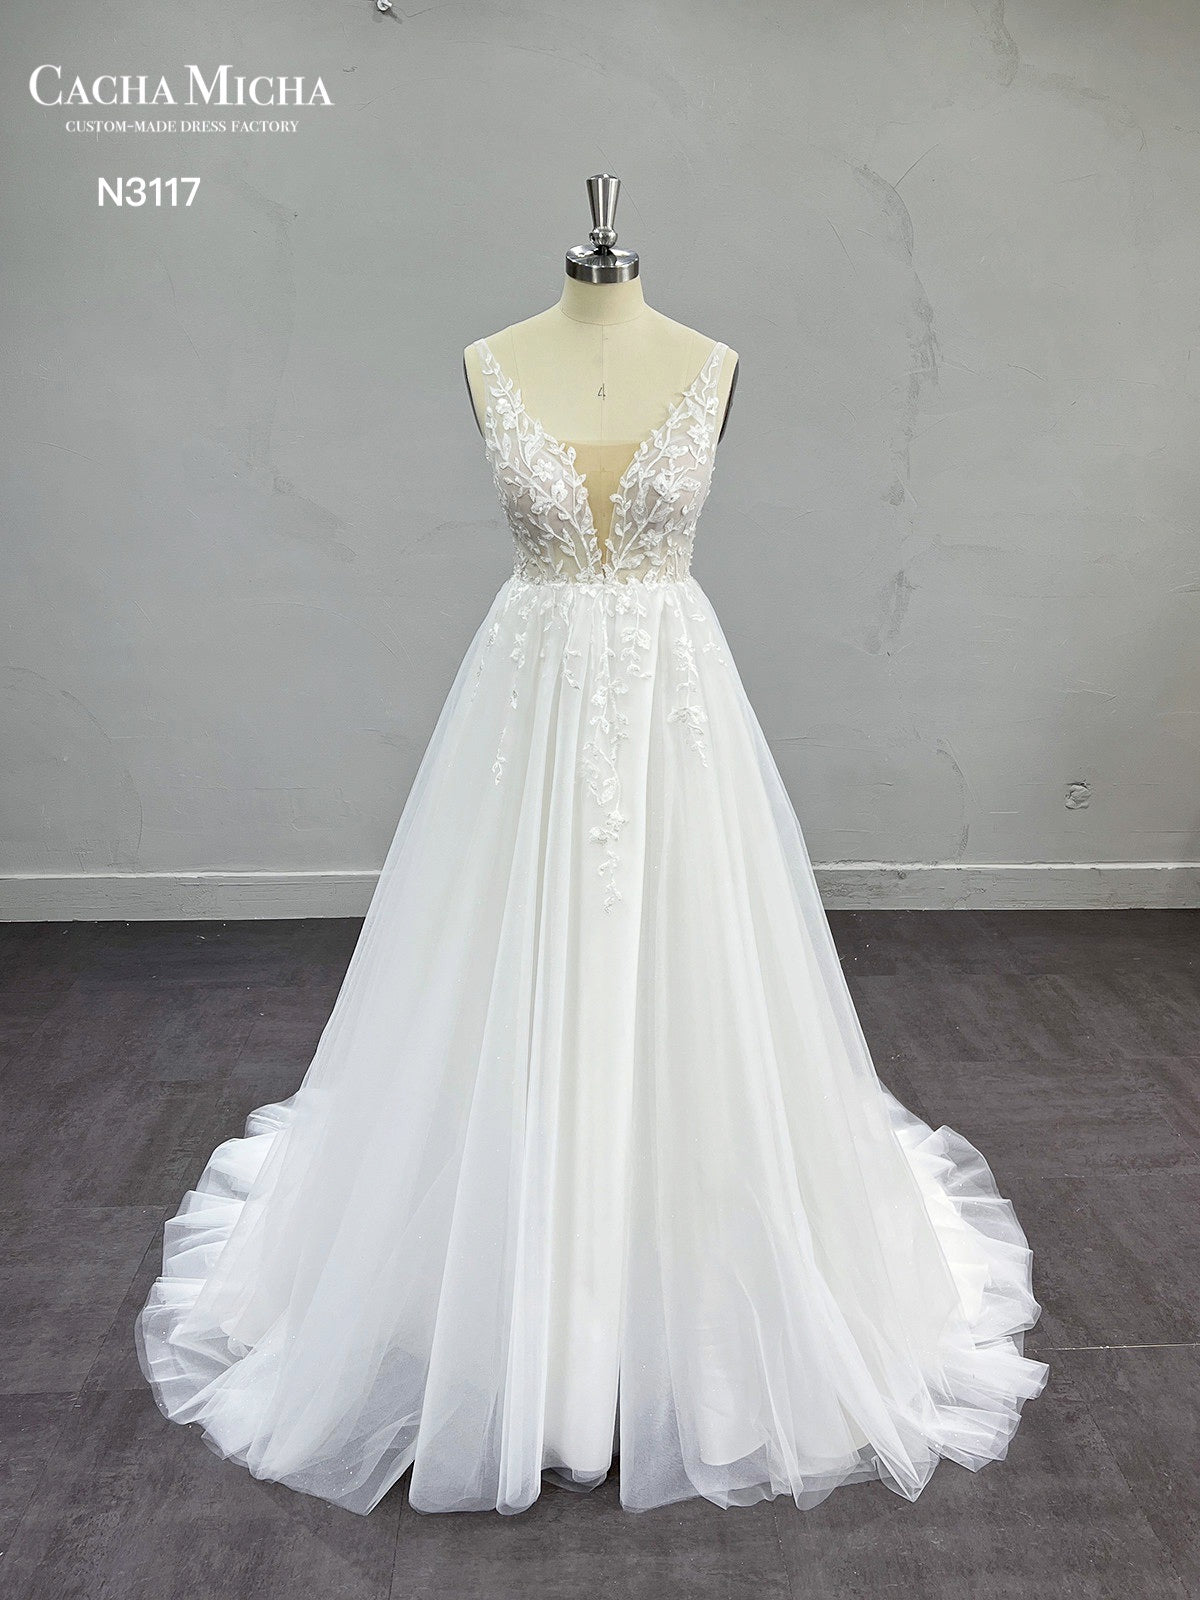 Affordable Soft Tulle with Lace A Line Wedding Dress N3117